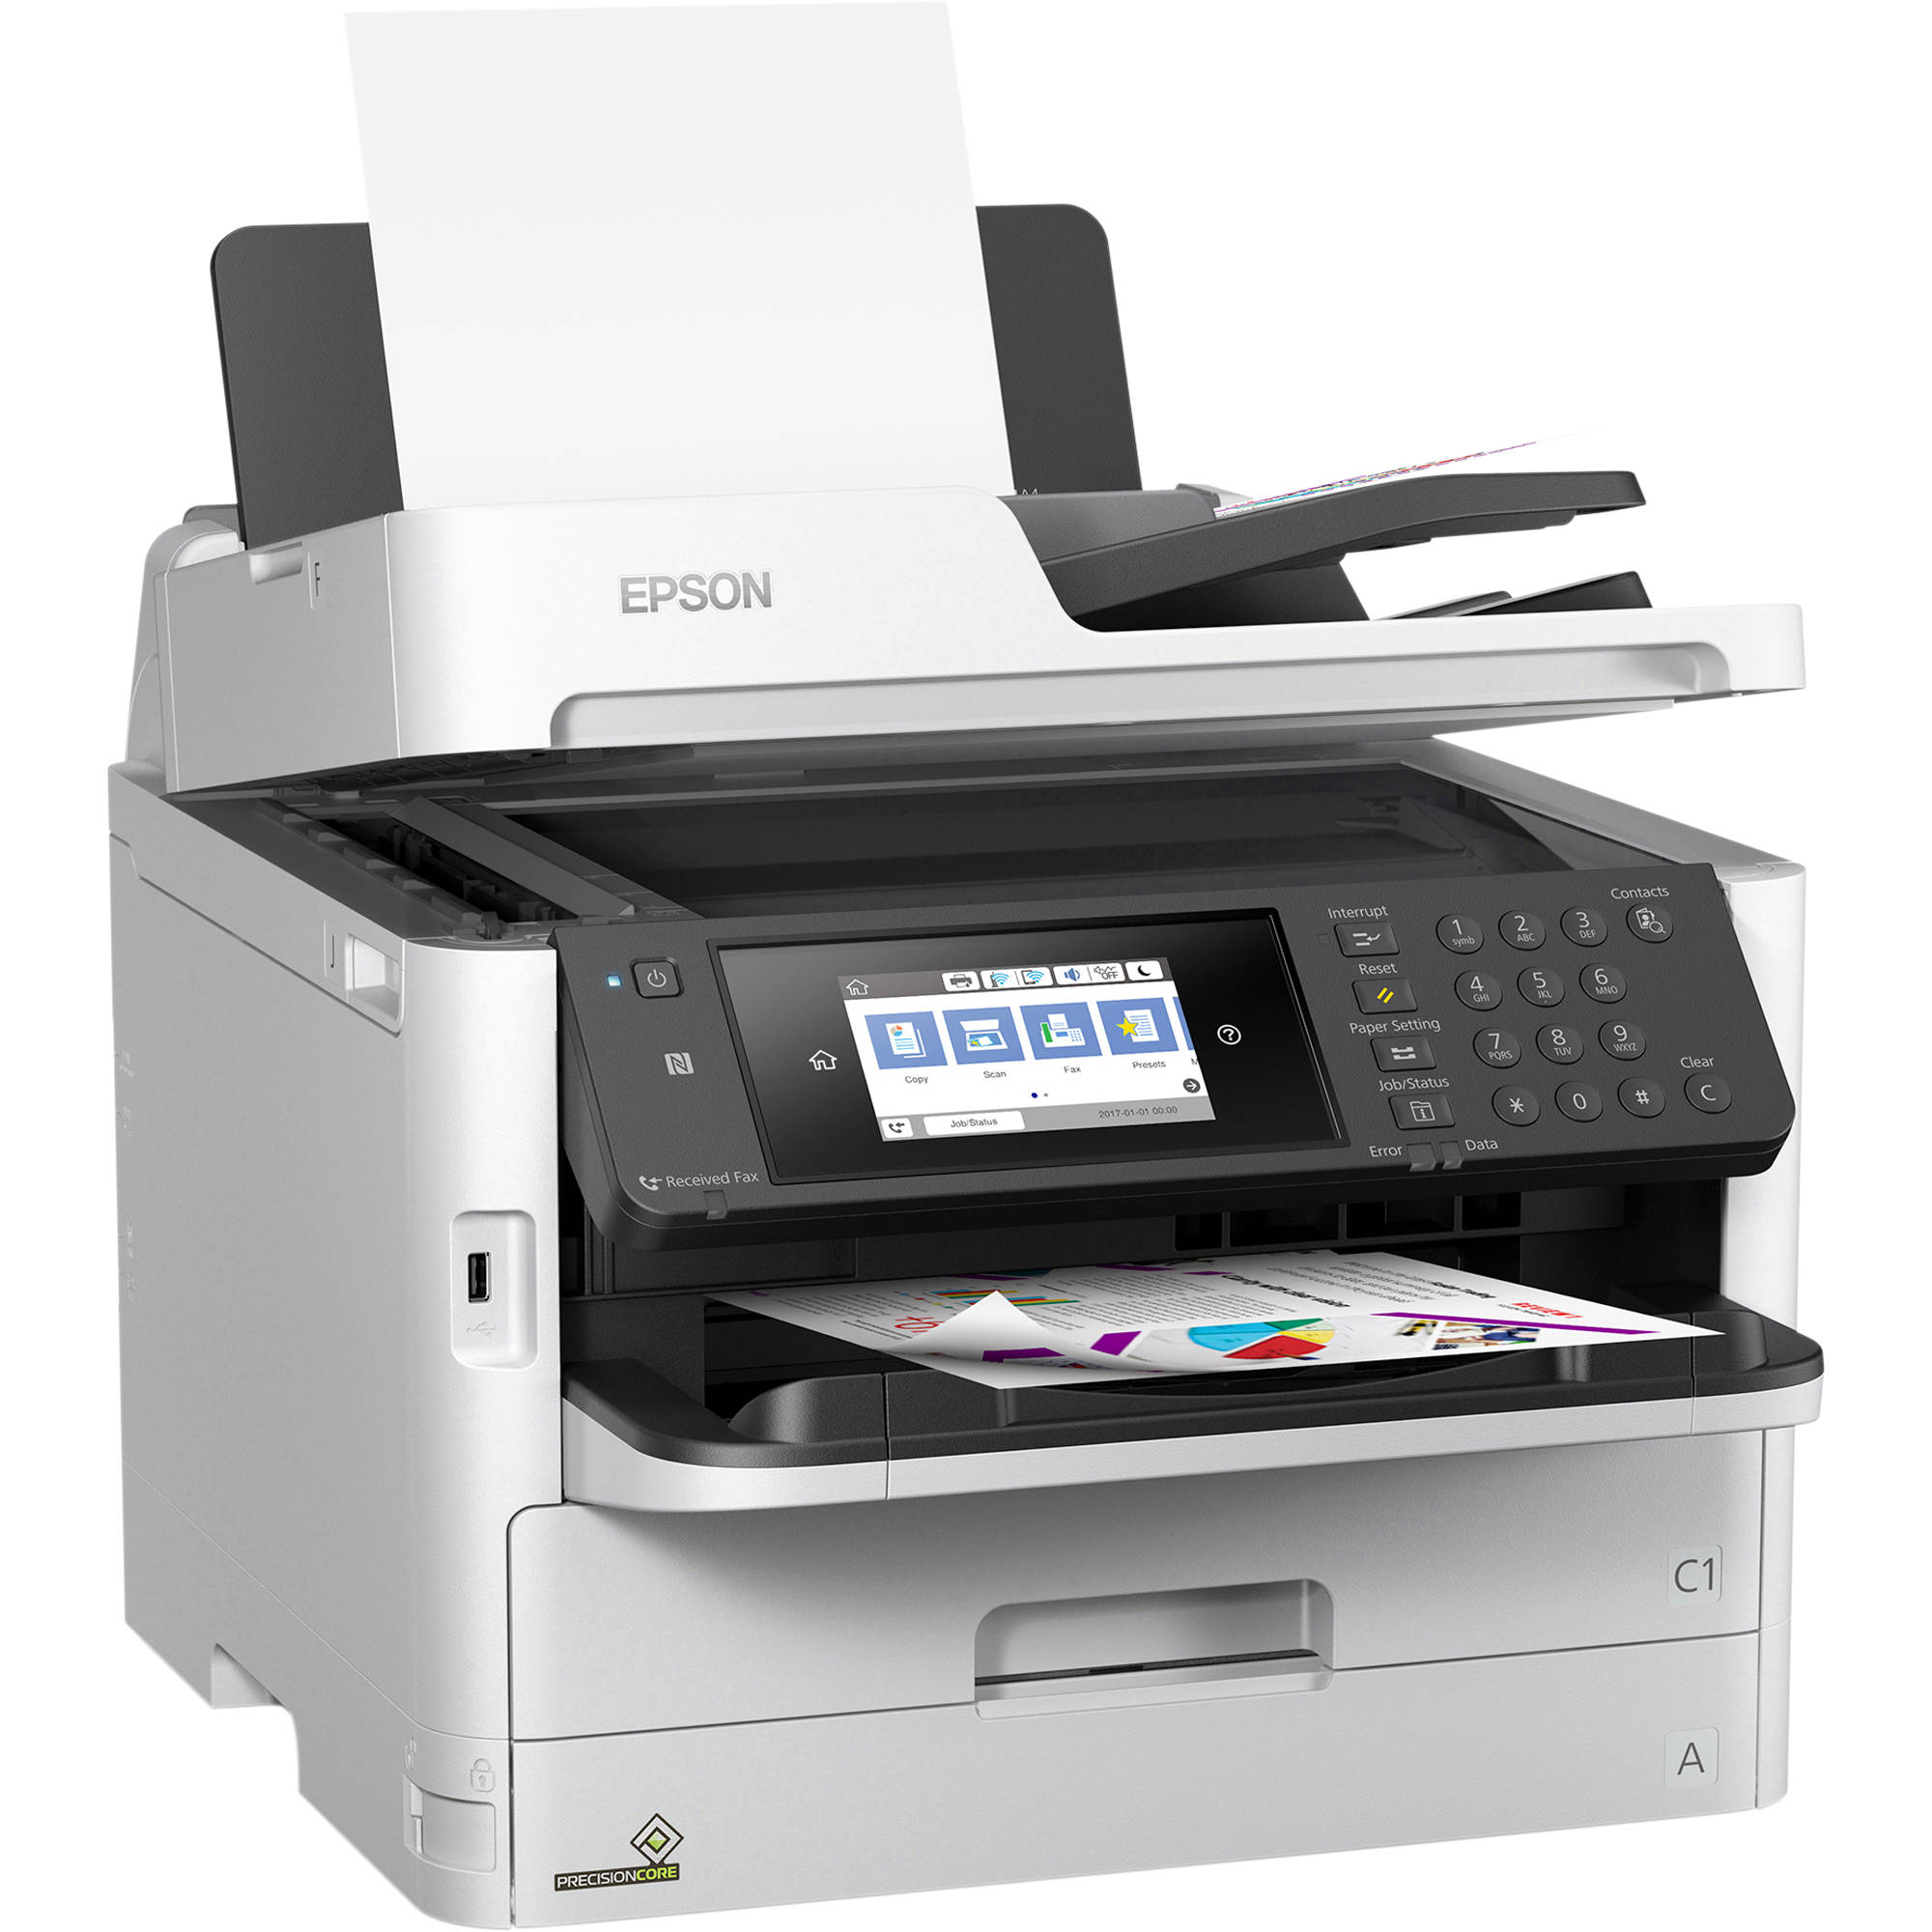 Absolute Toner New Epson Workforce Color Pro WF-C5710 Network Multifunction Printer With 24 Pages Per Minute, Silver For Office, Home Use In Canada Showroom Color Copier